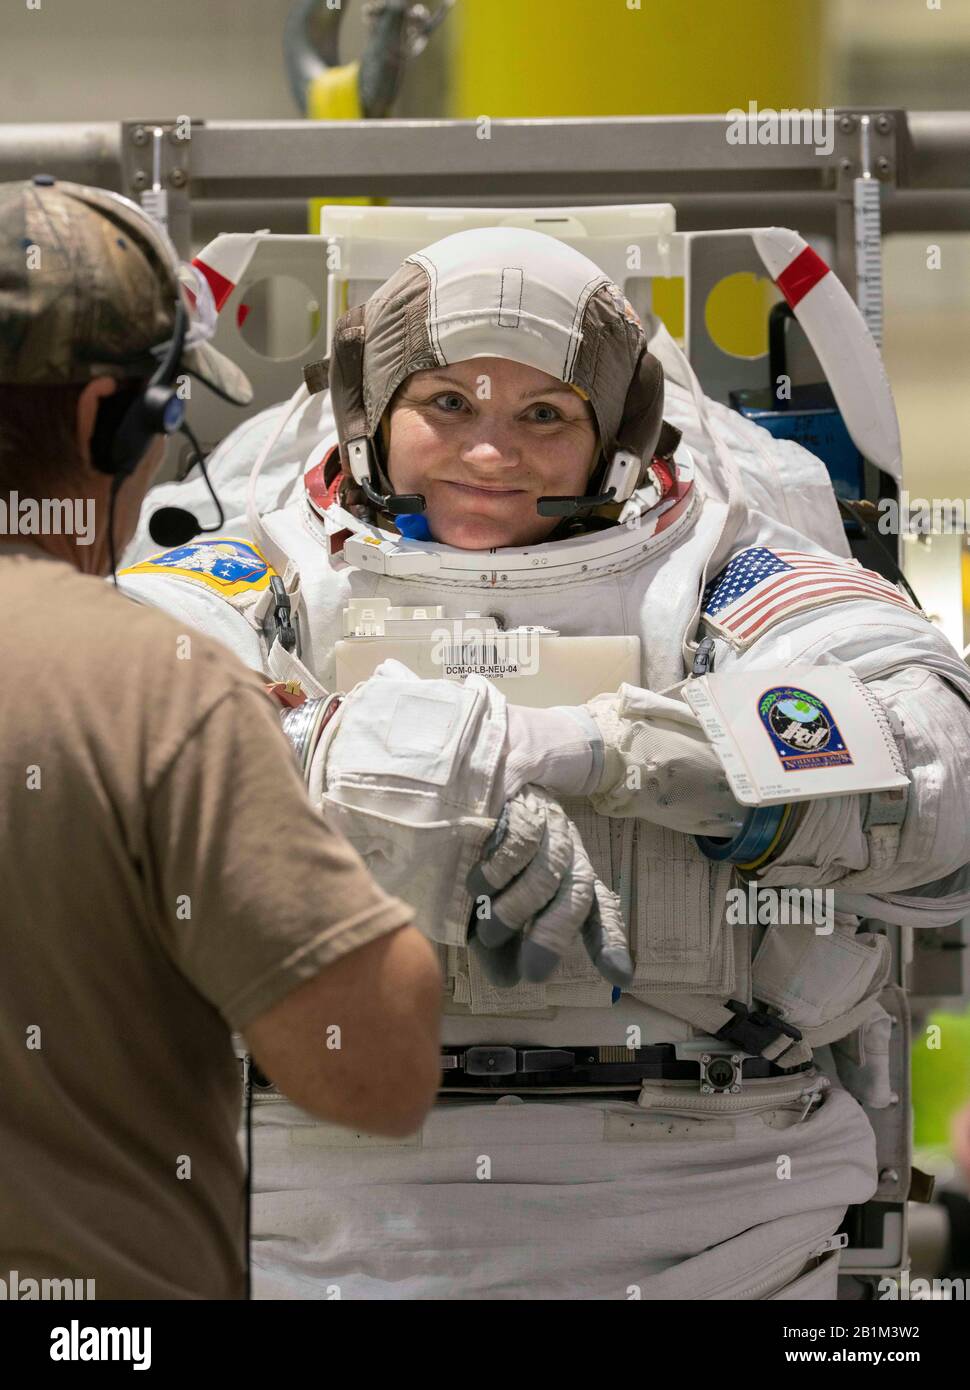 Veteran astronaut Anne C. McClain suits up in NASA's Neutral Buoyancy Lab for weightlessness training in the 6.2 million gallon pool containing a mock-up of the International Space Station (ISS) in Houston. Stock Photo